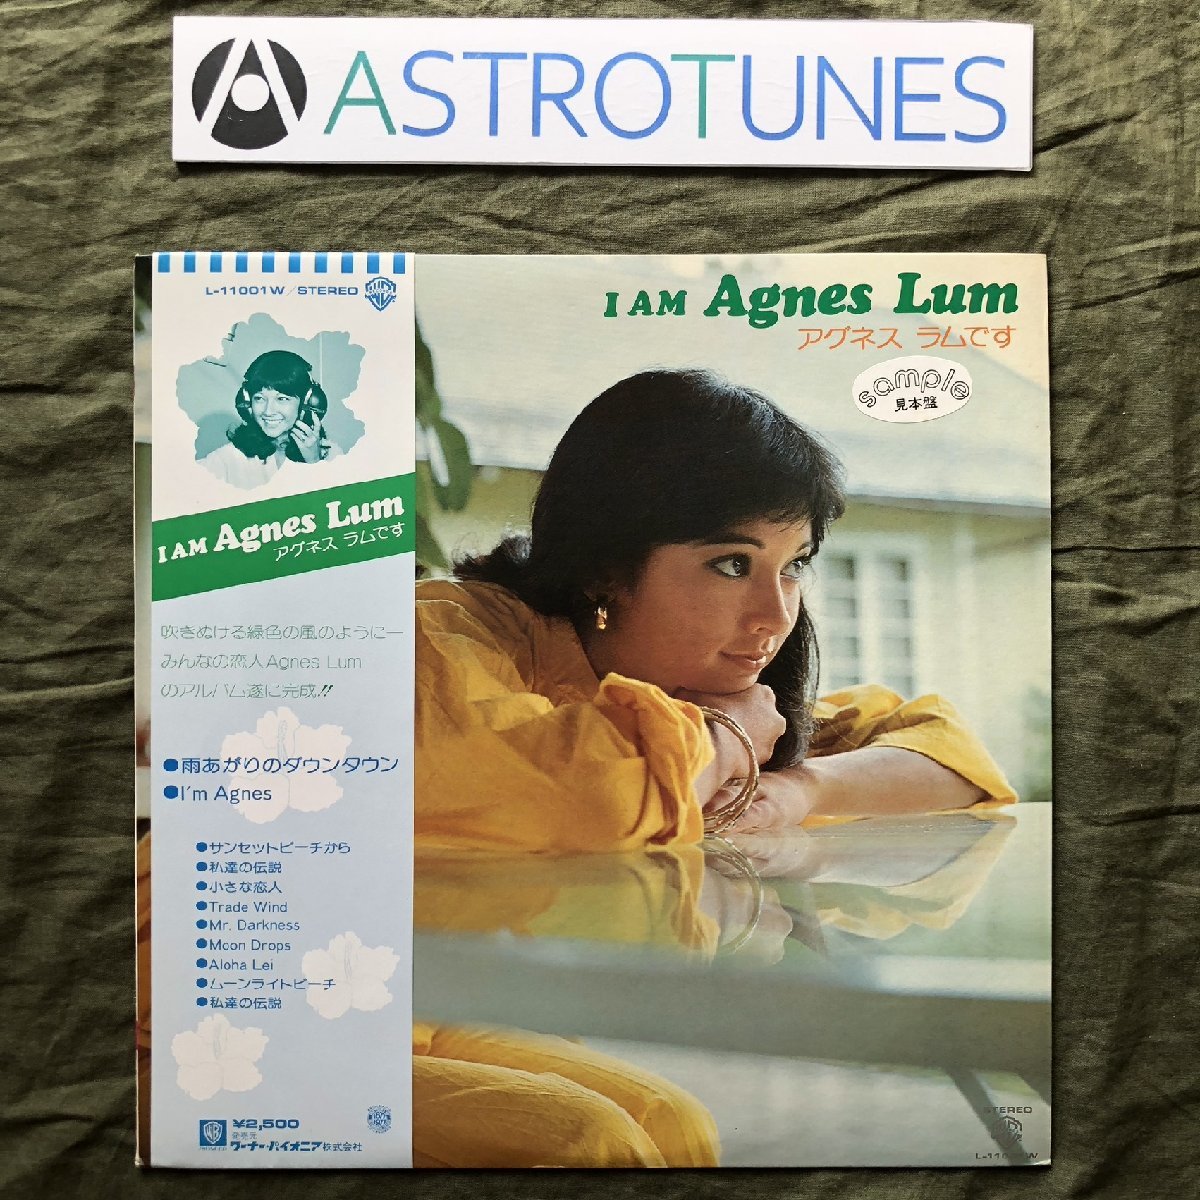 No scratches, good condition, not for sale, promo record, 1977, Agnes Lum, LP record, I Am Agnes Lum, with obi, 8p photo book, rock, Pop, A row, others